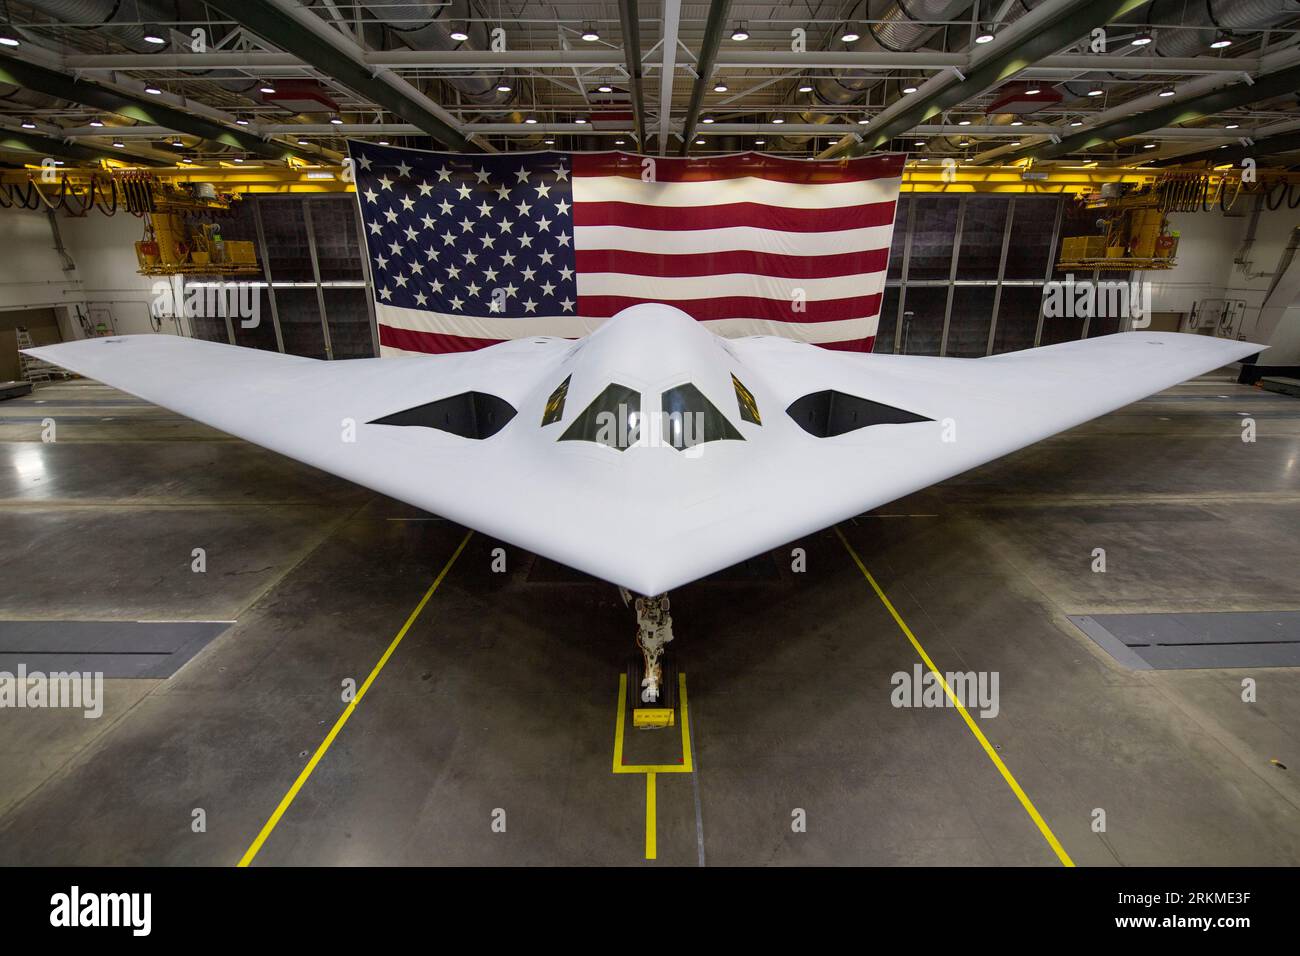 Palmdale, United States. 28 November, 2022. The U.S. Air Force B-21 Raider stealth strategic bomber aircraft in a hangar at Plant 42, before the unveiling ceremony at Edwards Air Force Base, November 28, 2022 in Palmdale, California.  Credit: USAF/U.S. Air Force Photo/Alamy Live News Stock Photo